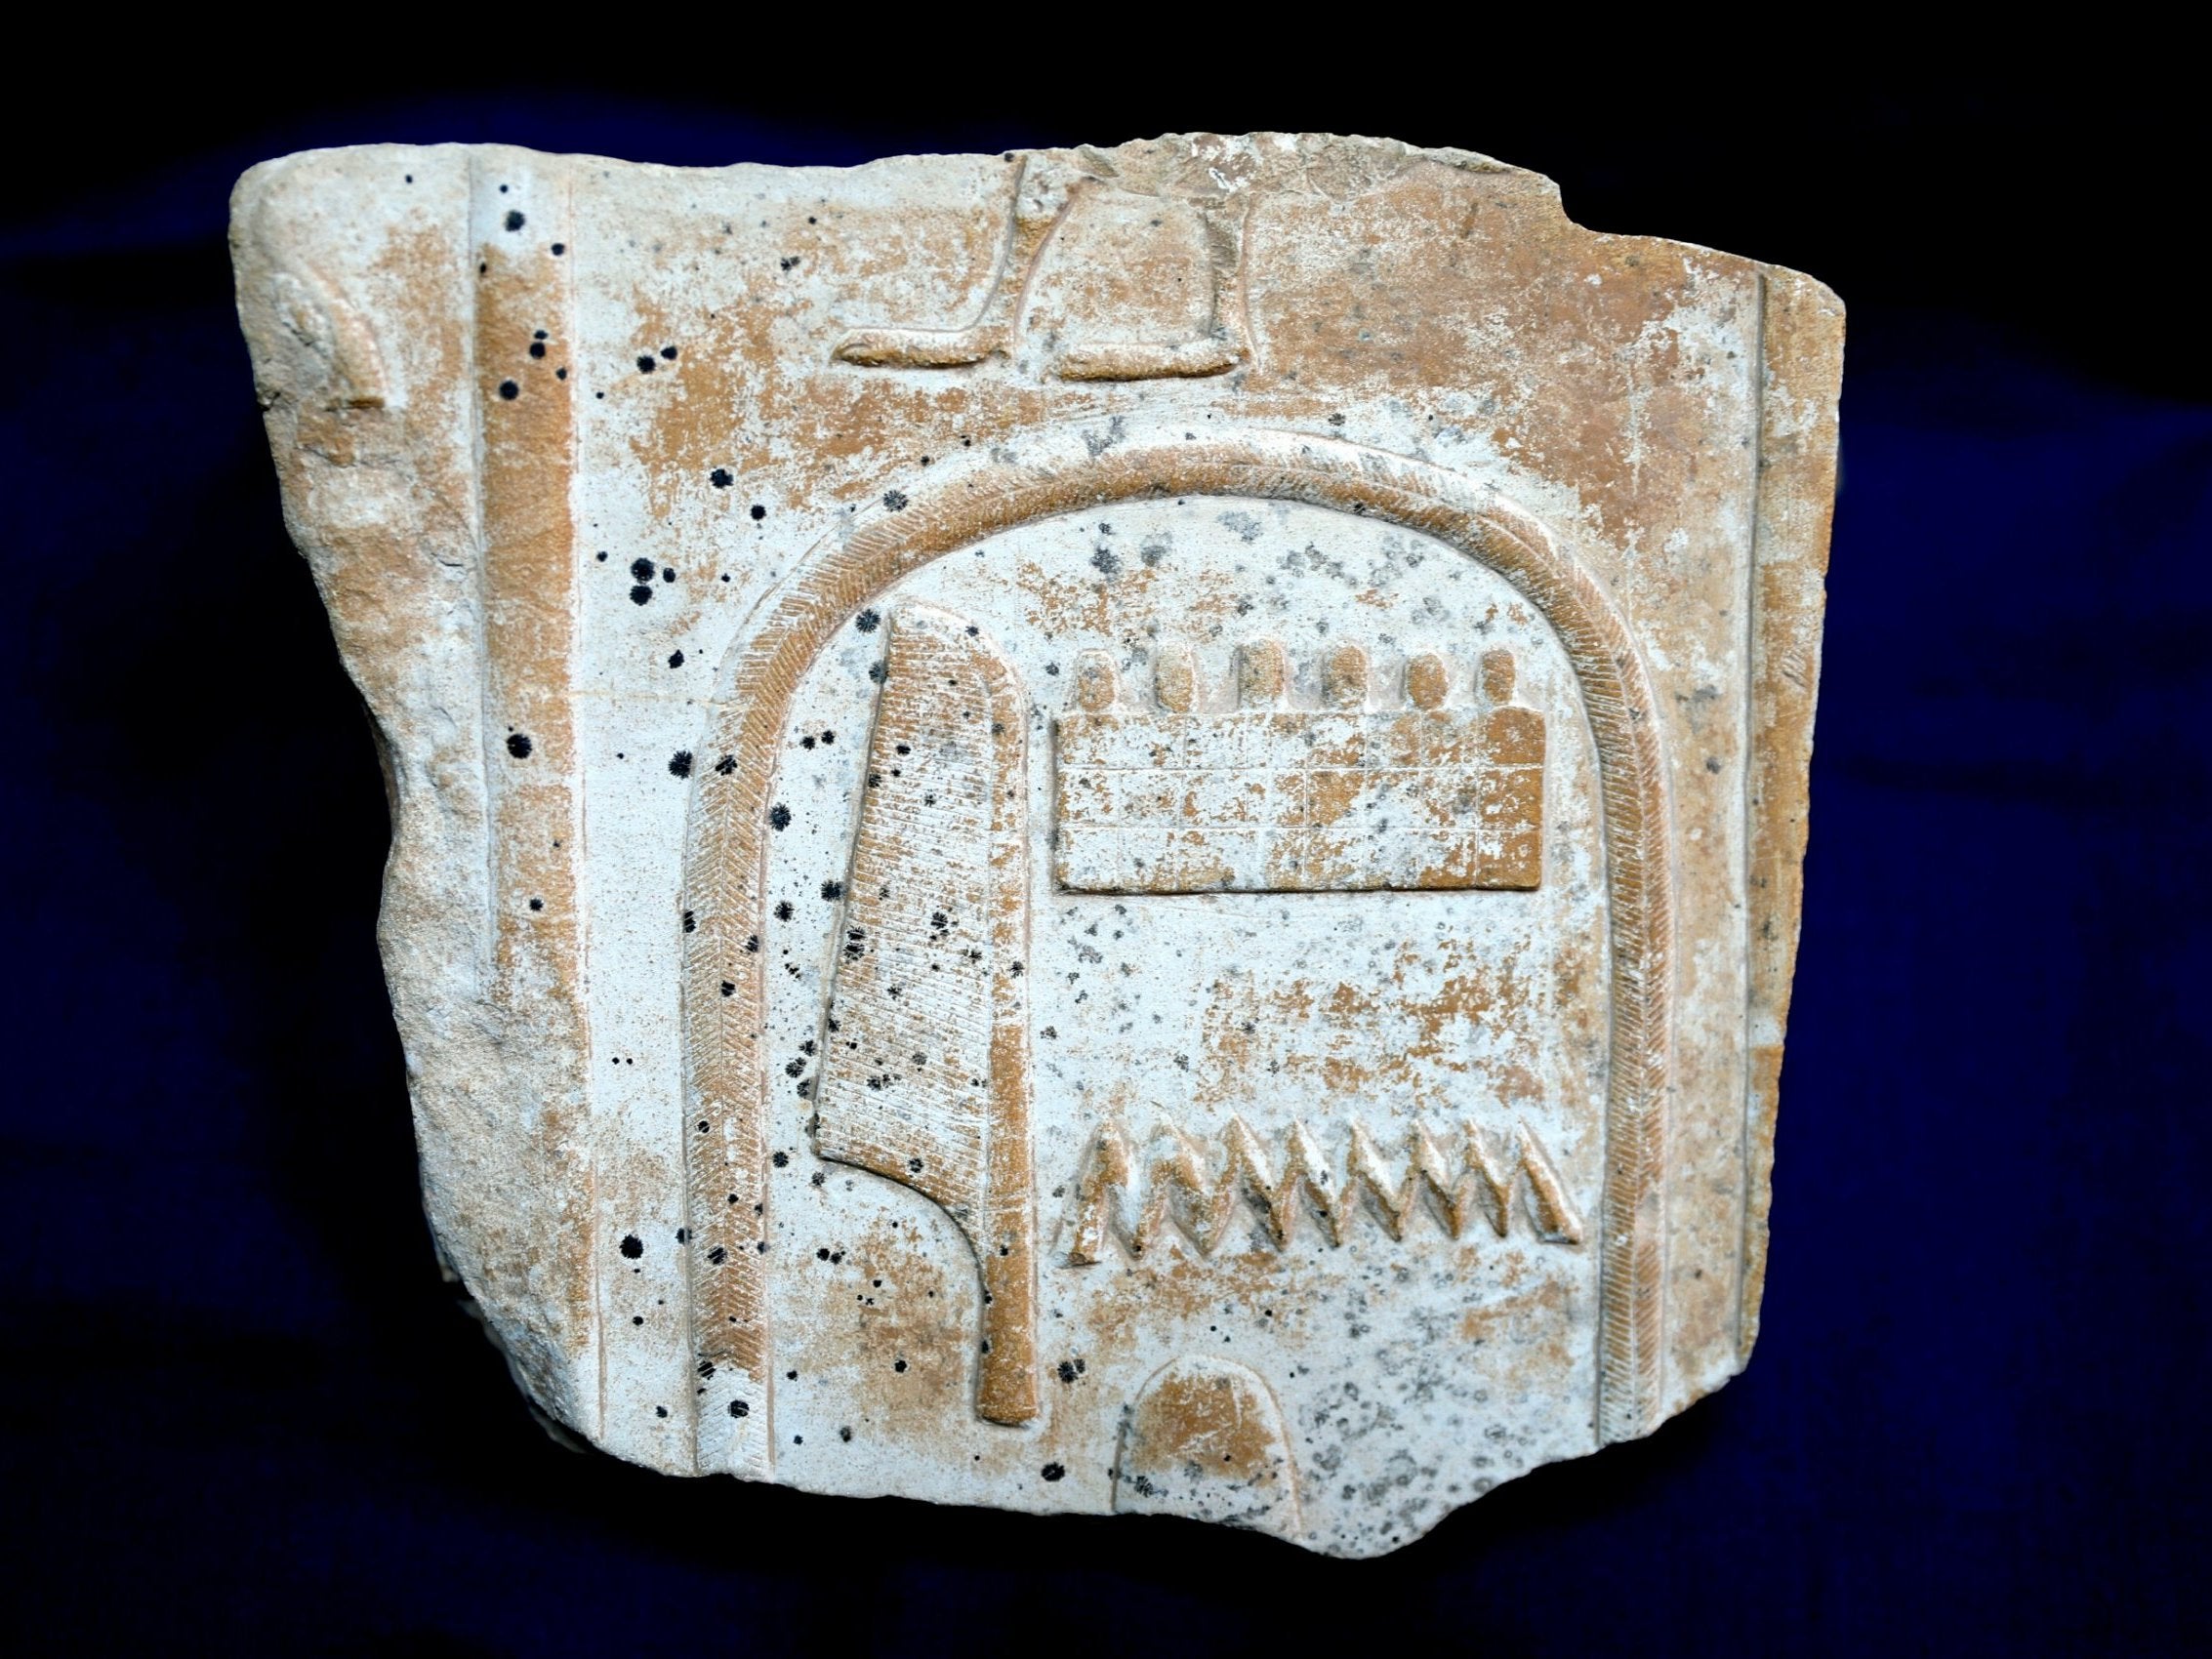 The lost relief with cartouche of King Amonhotep I was stolen in 1988 and found on display at a London auction house last year